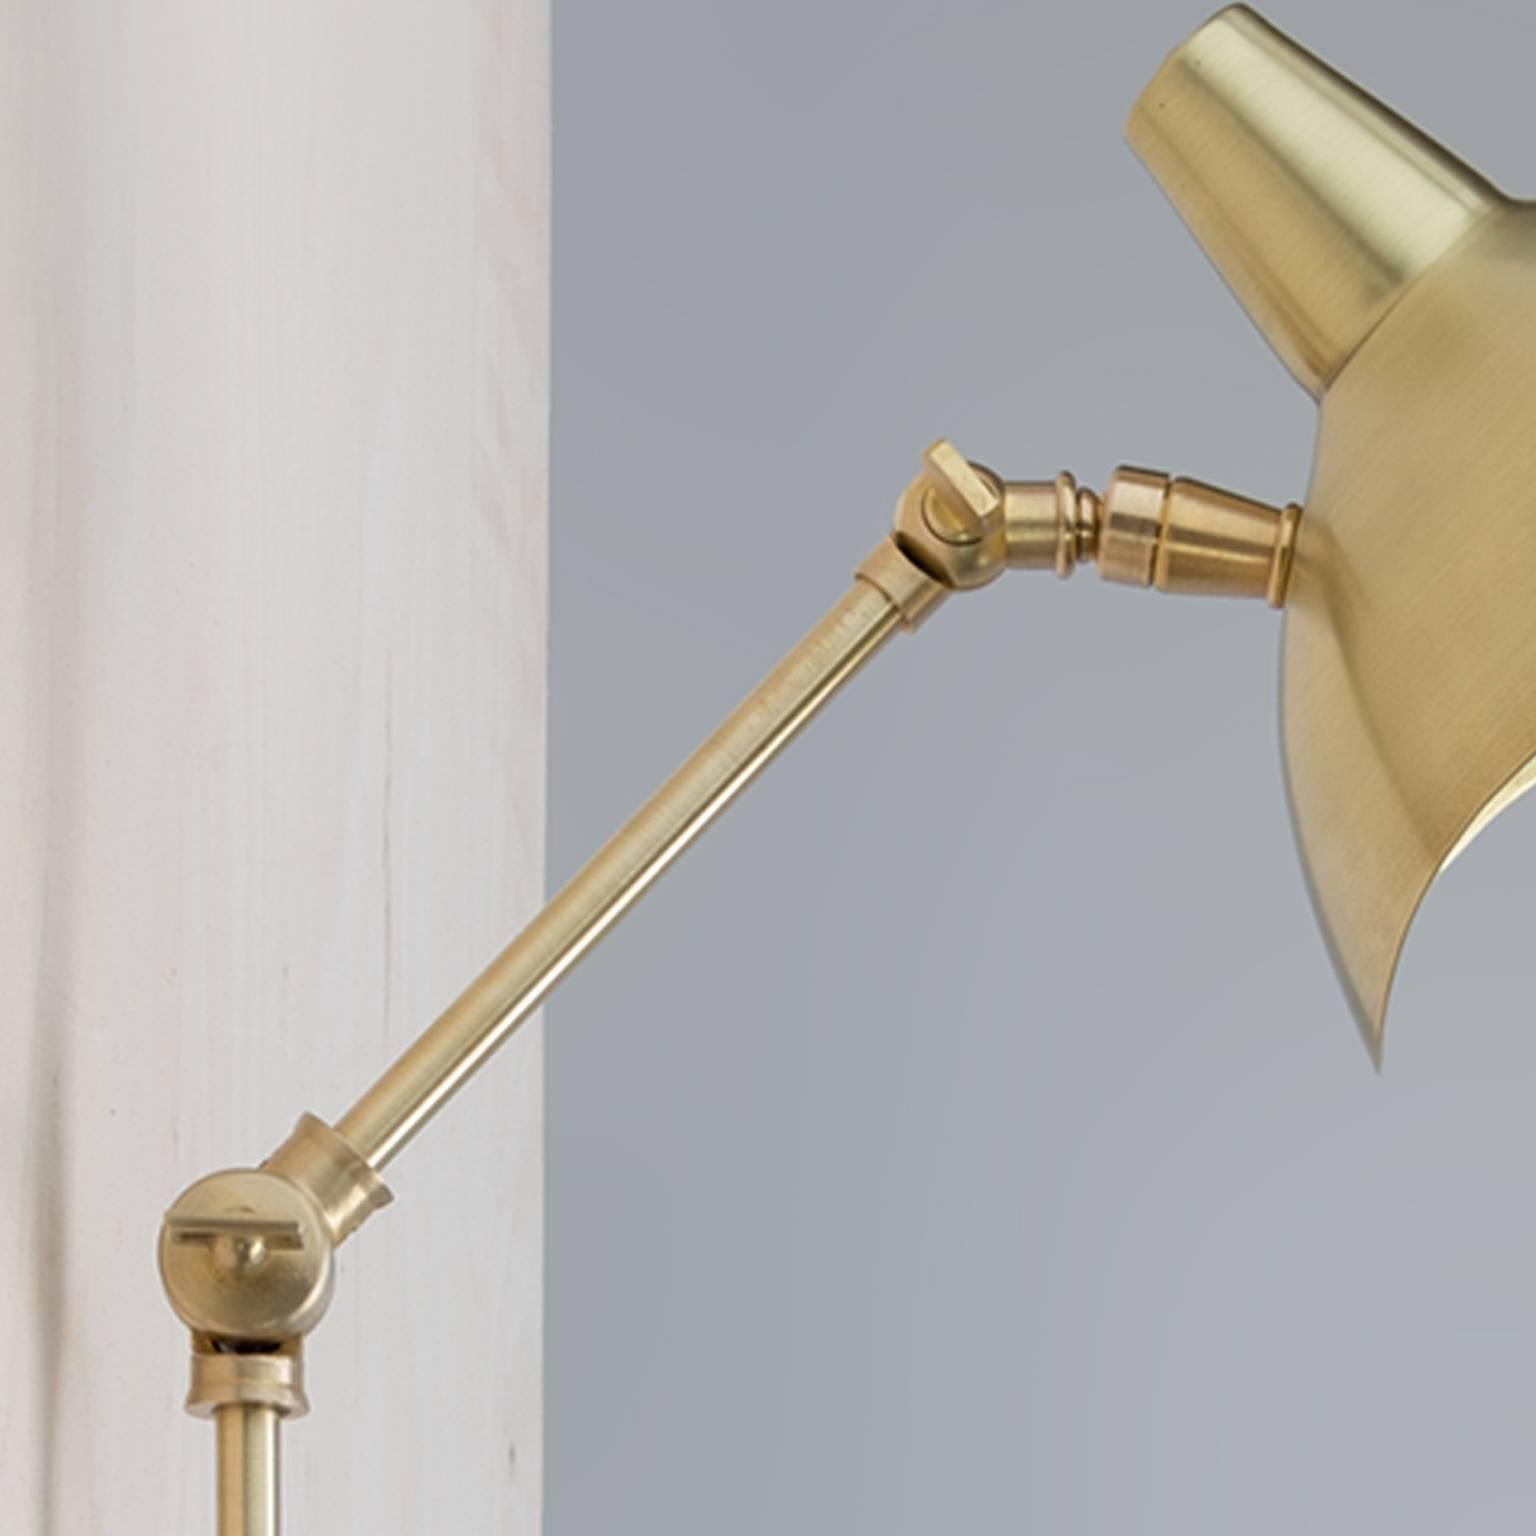 Brass swivel custom-made metal wall sconce
Brass custom work
Measures: 37” H x 7” D shade
Brass canopy: 5" D
Additional custom sizes and finishes available upon request

100% Sustainable, 100% Recyclable, Zero Child Labor, 100% Made in USA